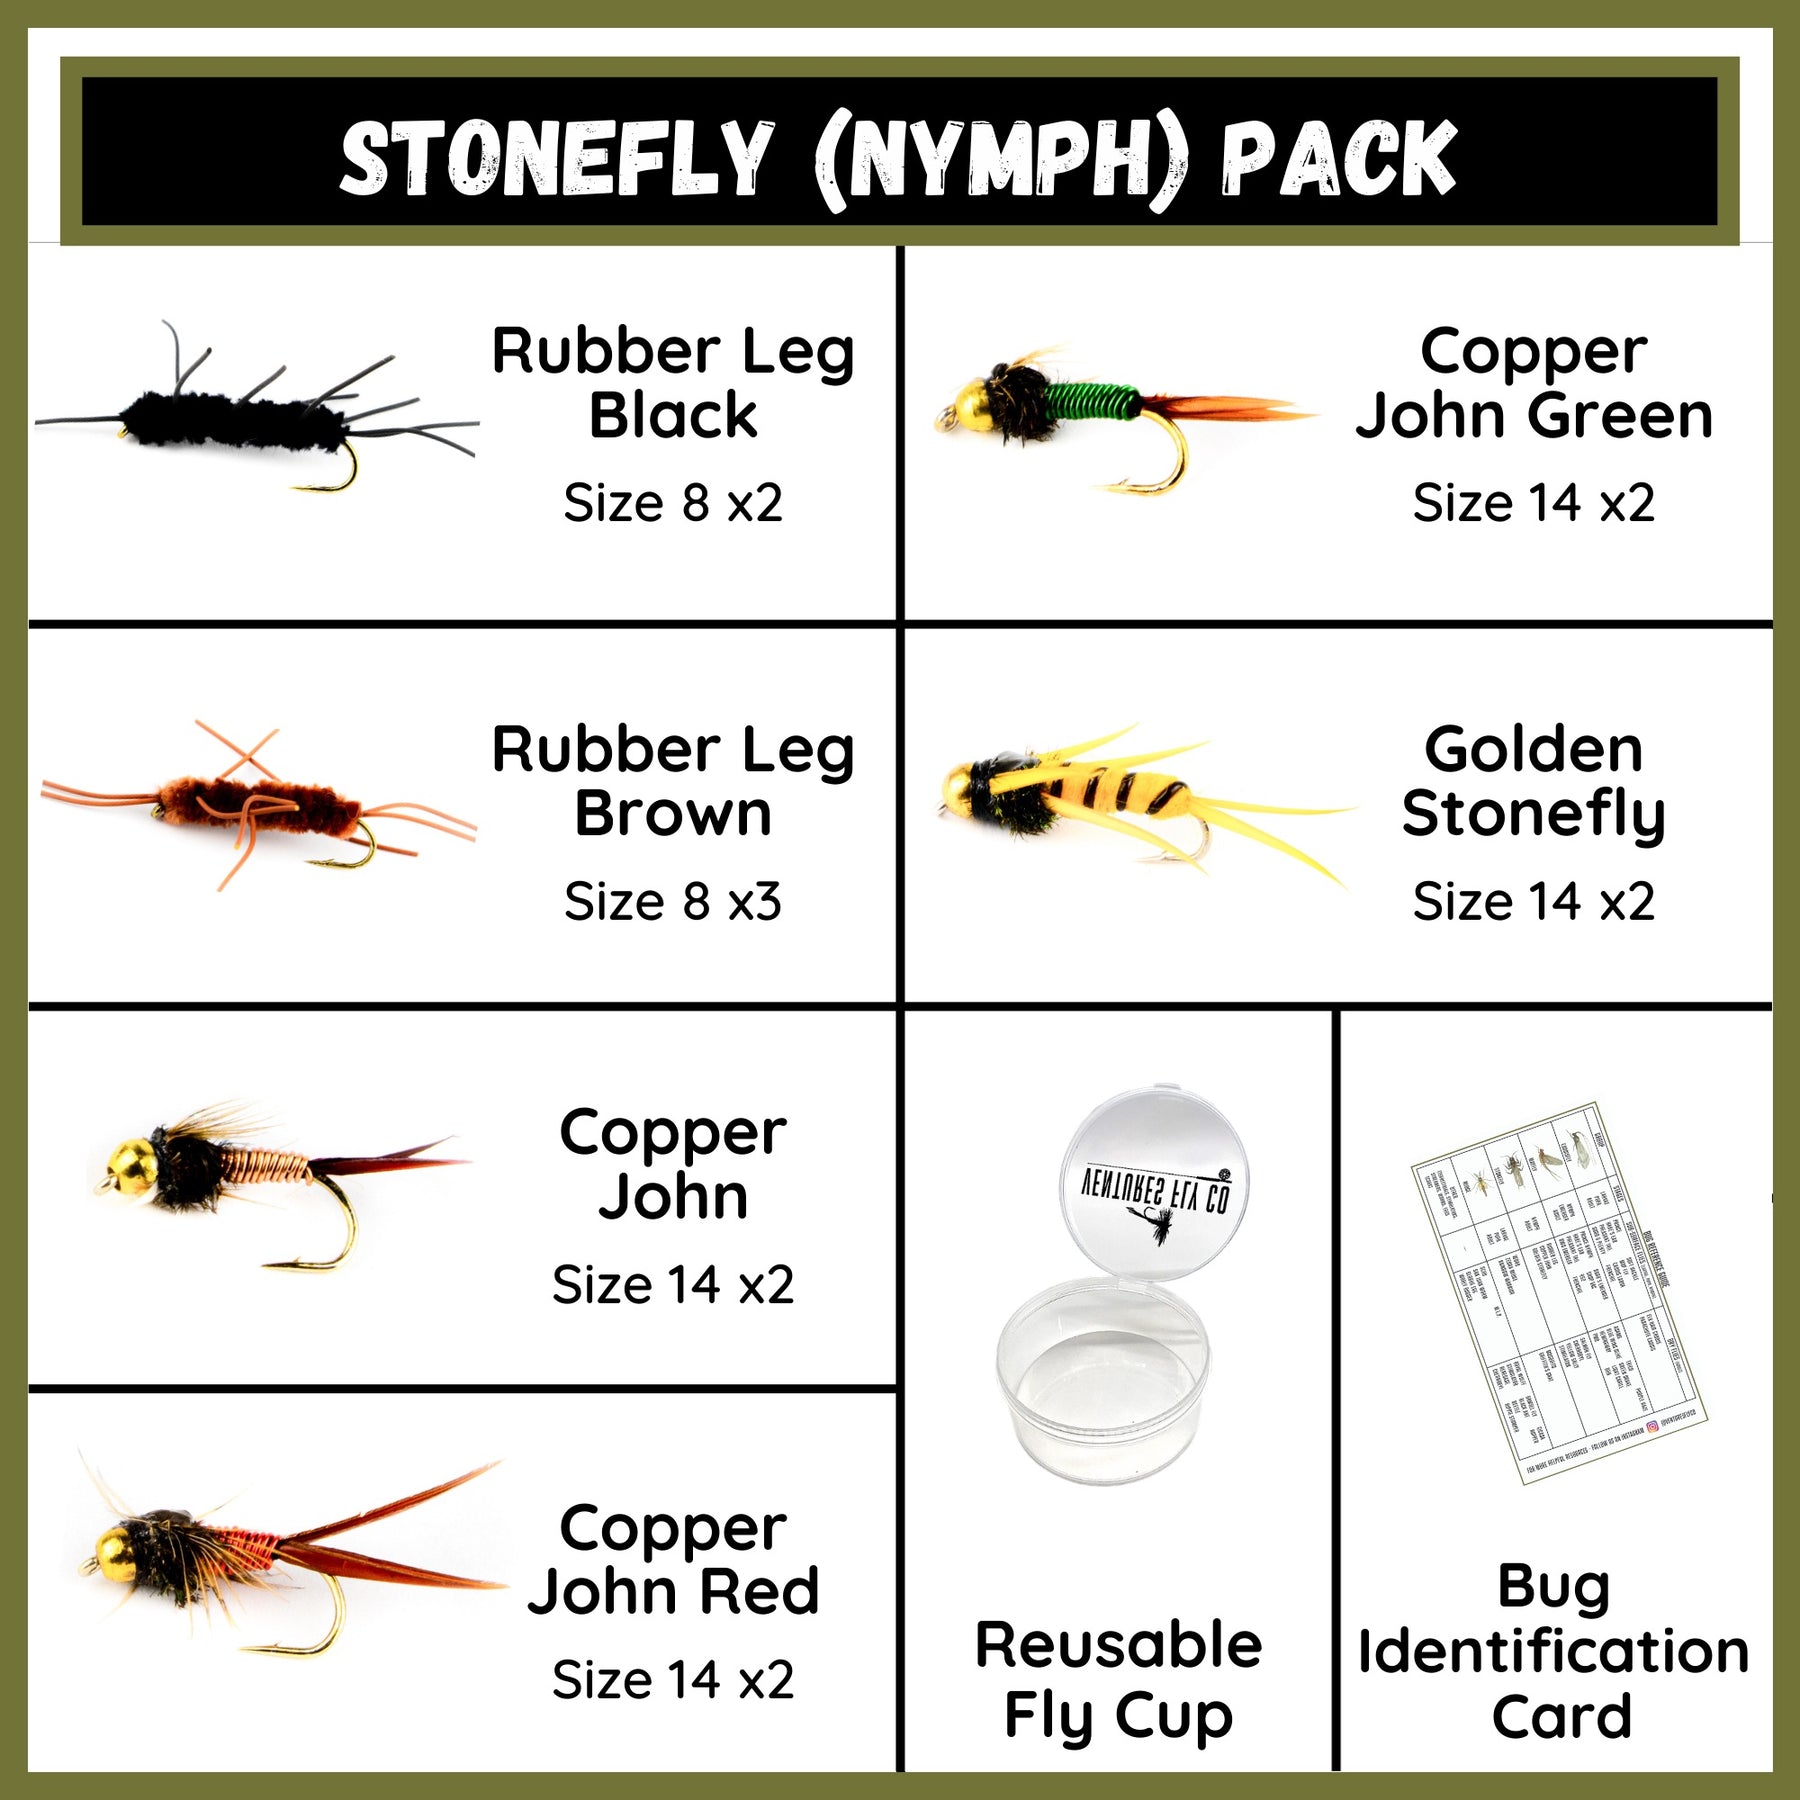 Alwonder 10PCS Trout Flies Stonefly Nymphs for Fly Fishing, Wet Nymph Flies  Fly Fishing Lures Assortment with Storage Box, Size 12 Copper Bead Head  Stoneflies Nymphs for Bass, Salmon, Panfish, Wet Flies 